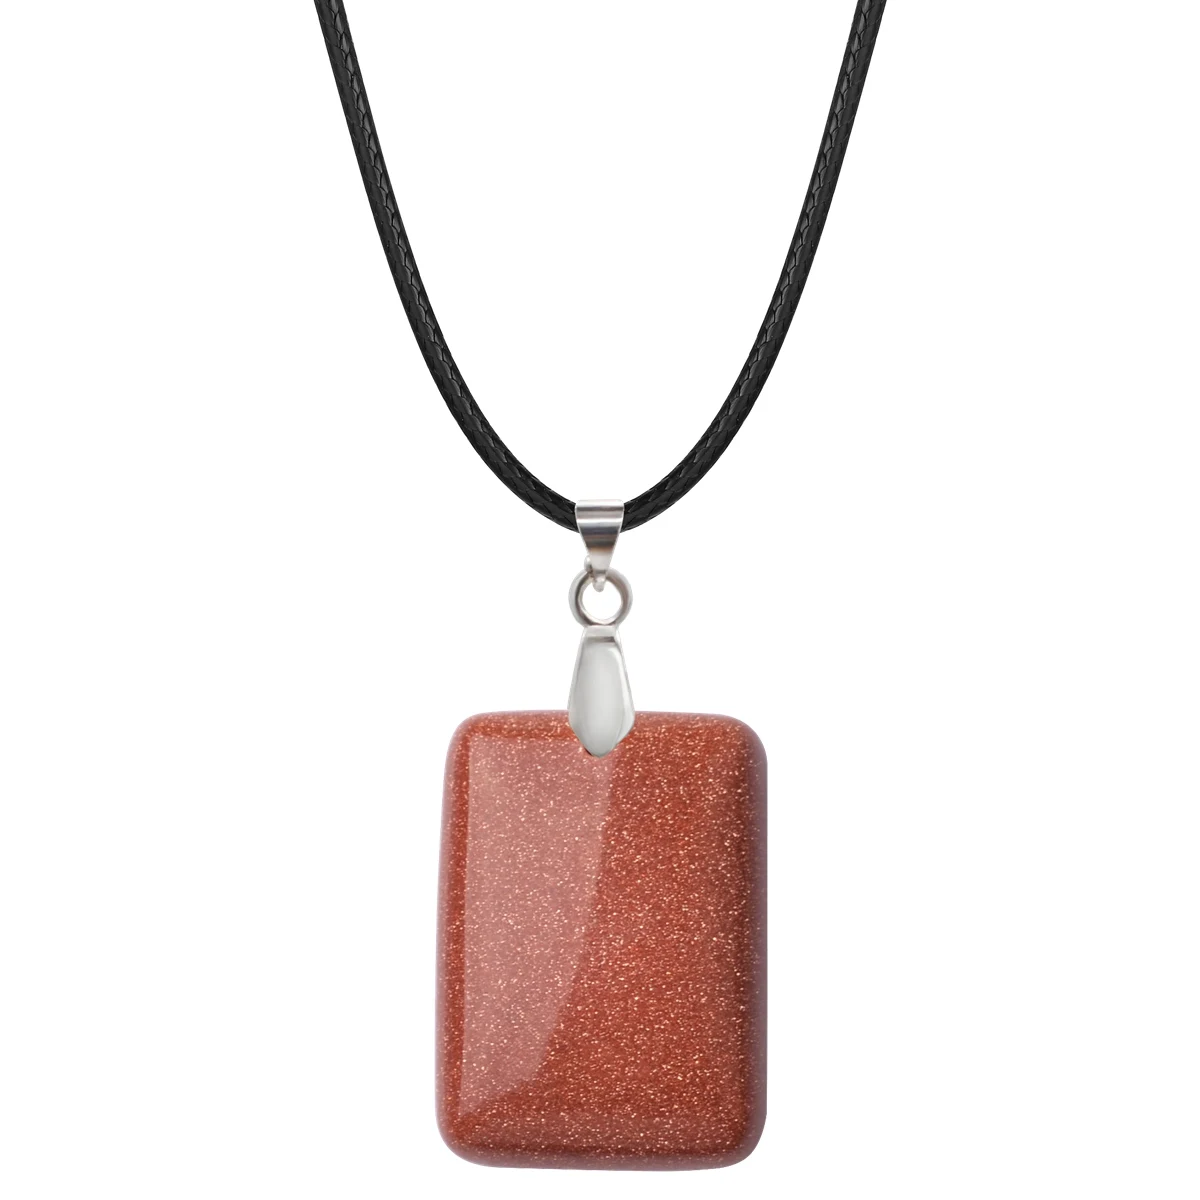 

Red Goldstone 30X40MM Rectangle Pendant Necklace Healing Chakra Crystal Spiritual Choker Charms Jewelry for Women Girls